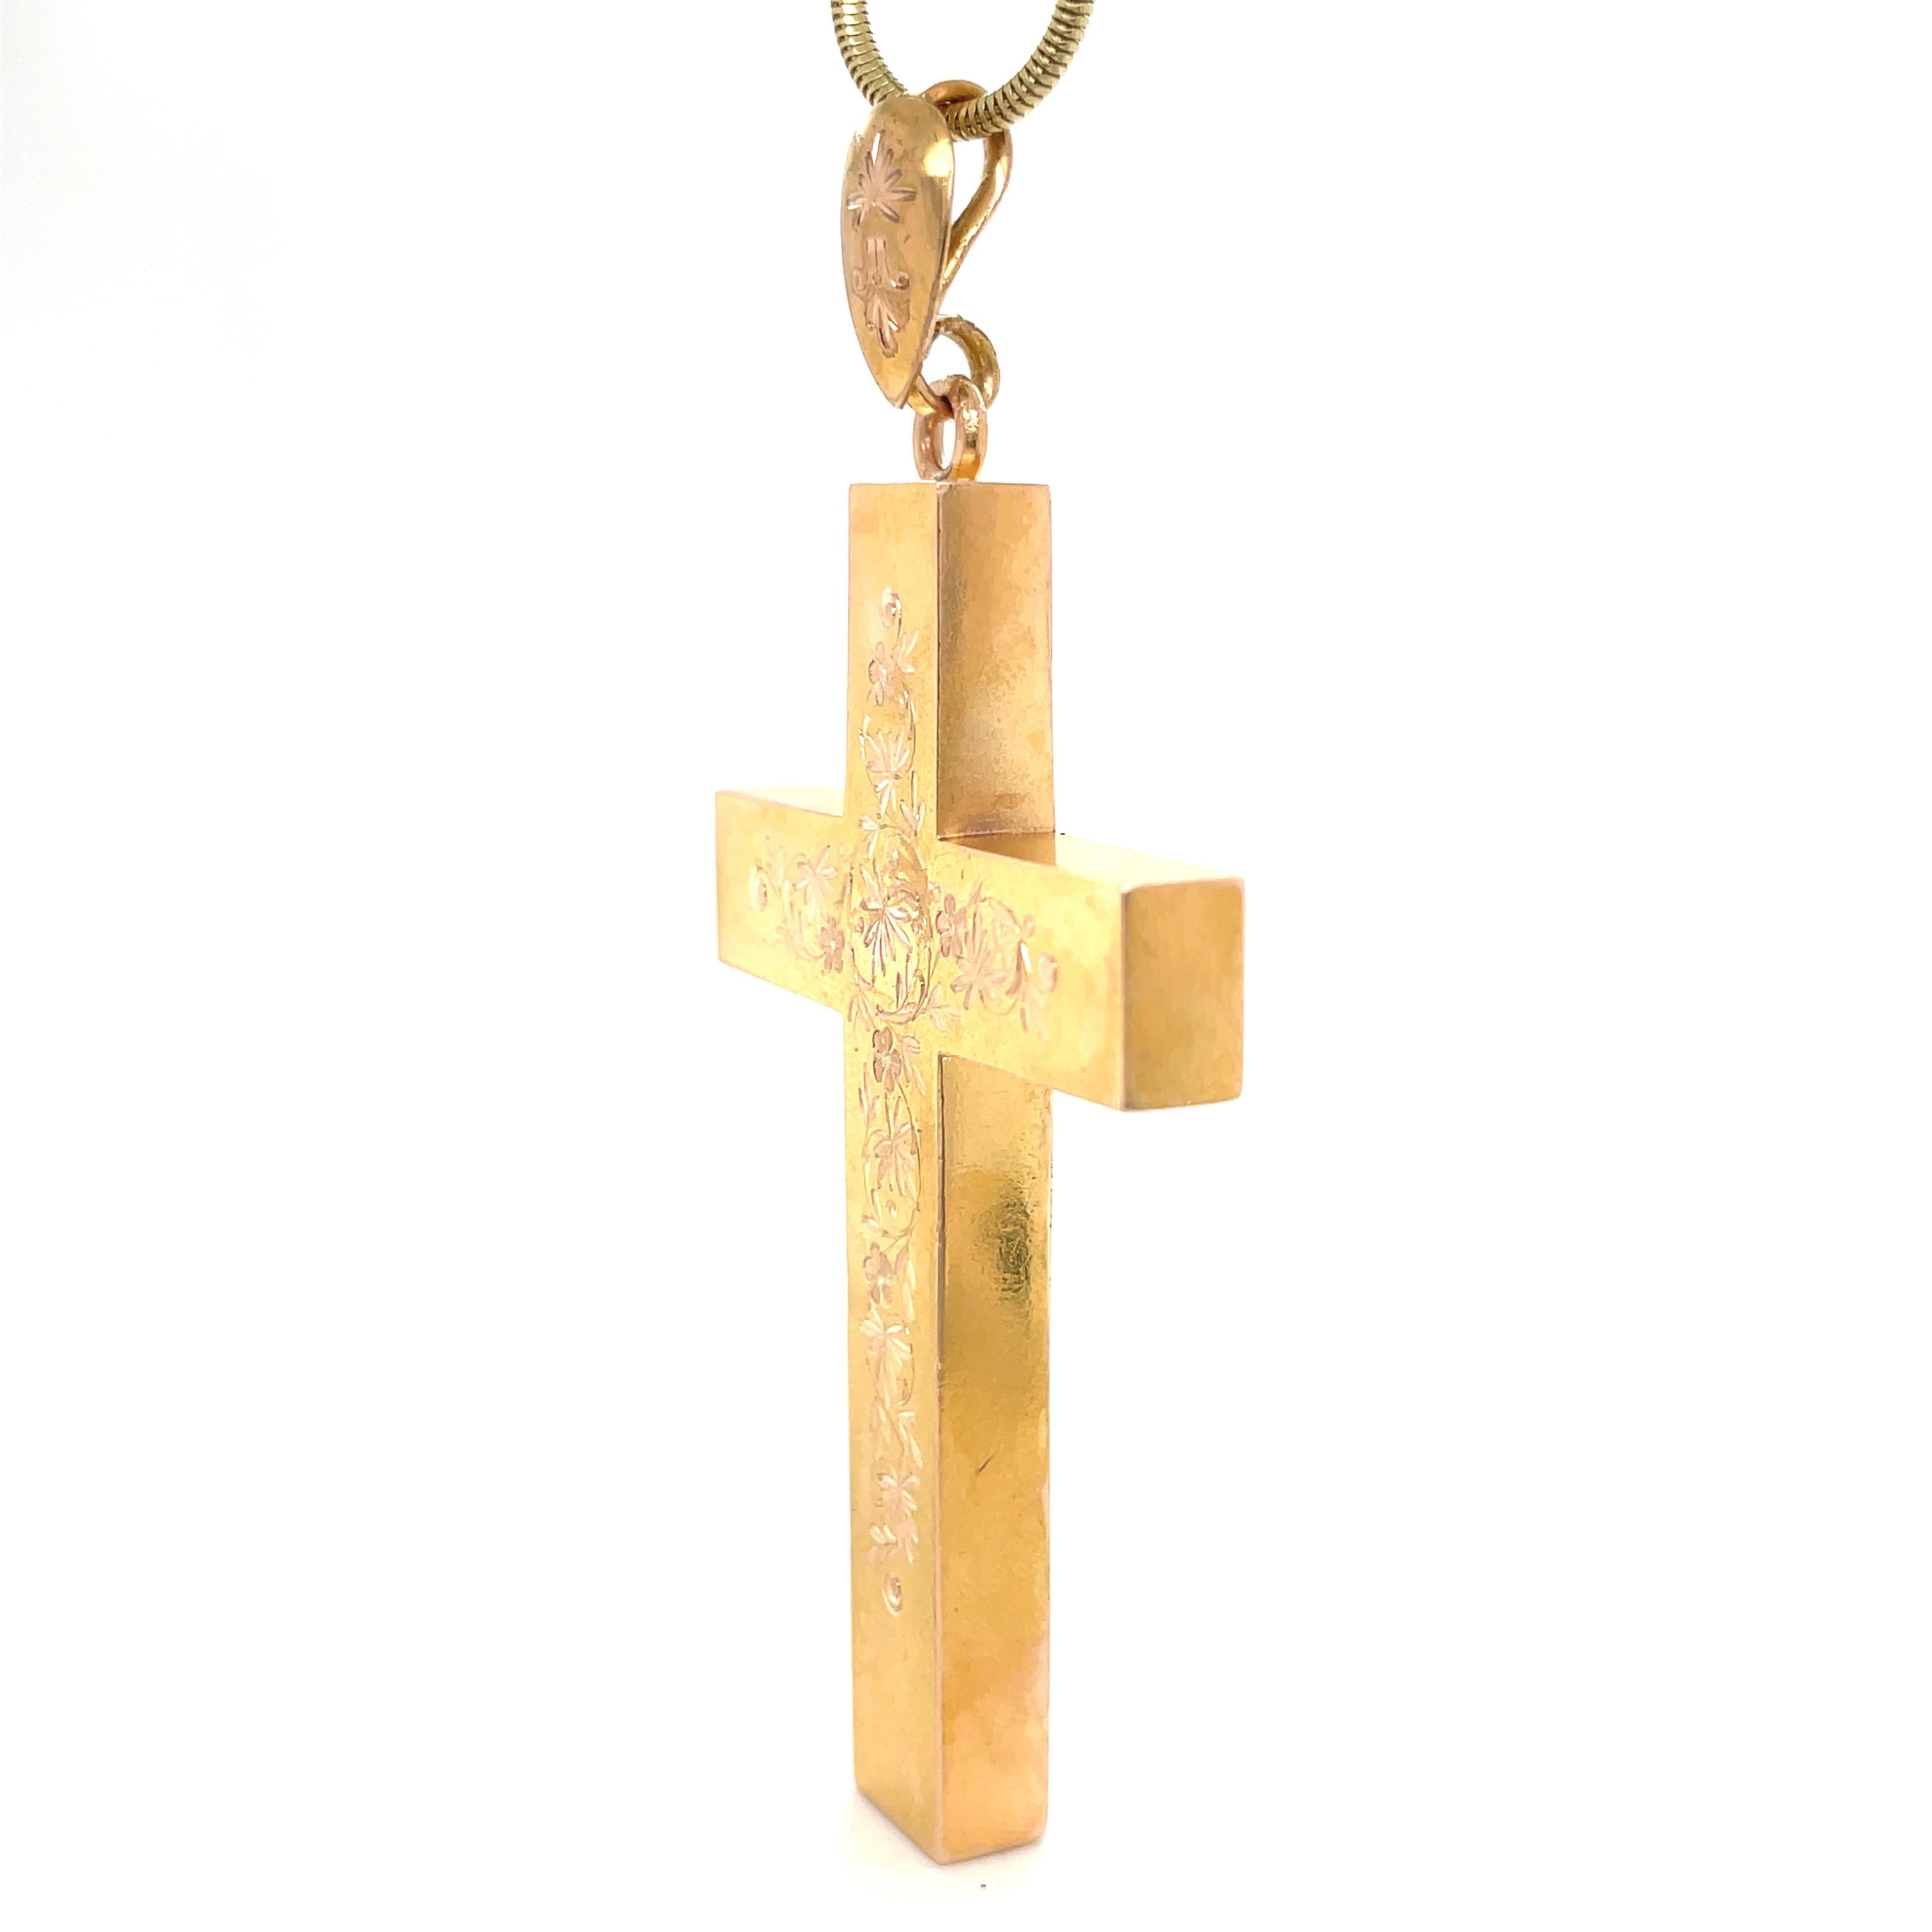 Absolutely beautiful antique cross.  Deeply hand engraved delicate pattern on the front.  On the reverse side, it is engraved 